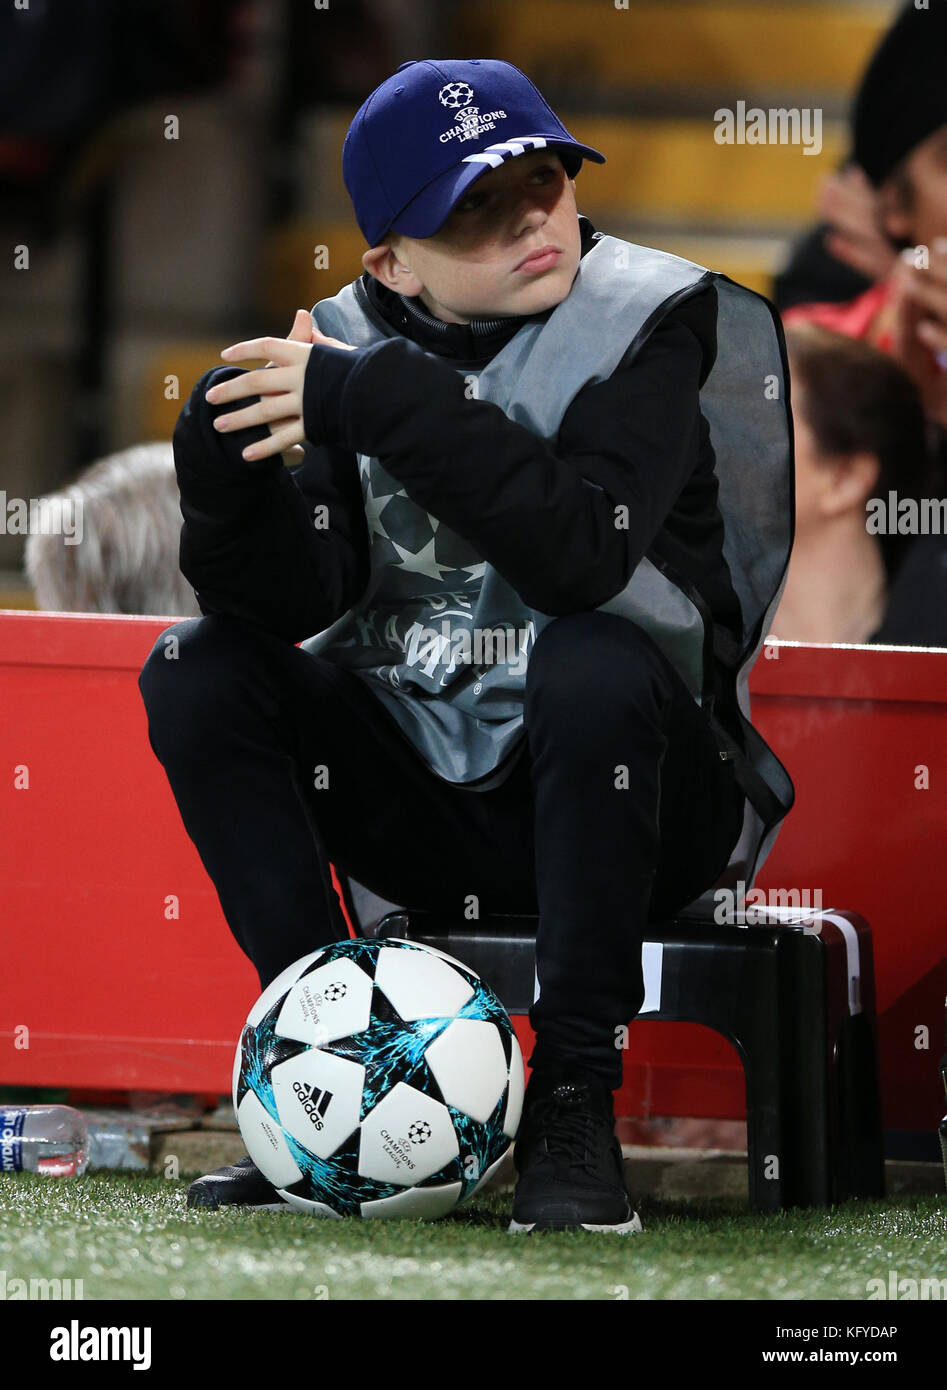 A Ball Boy During The Uefa Champions League Group E Match At Anfield Liverpool Press Association Photo Picture Date Wednesday November 1 17 See Pa Story Soccer Liverpool Photo Credit Should Read